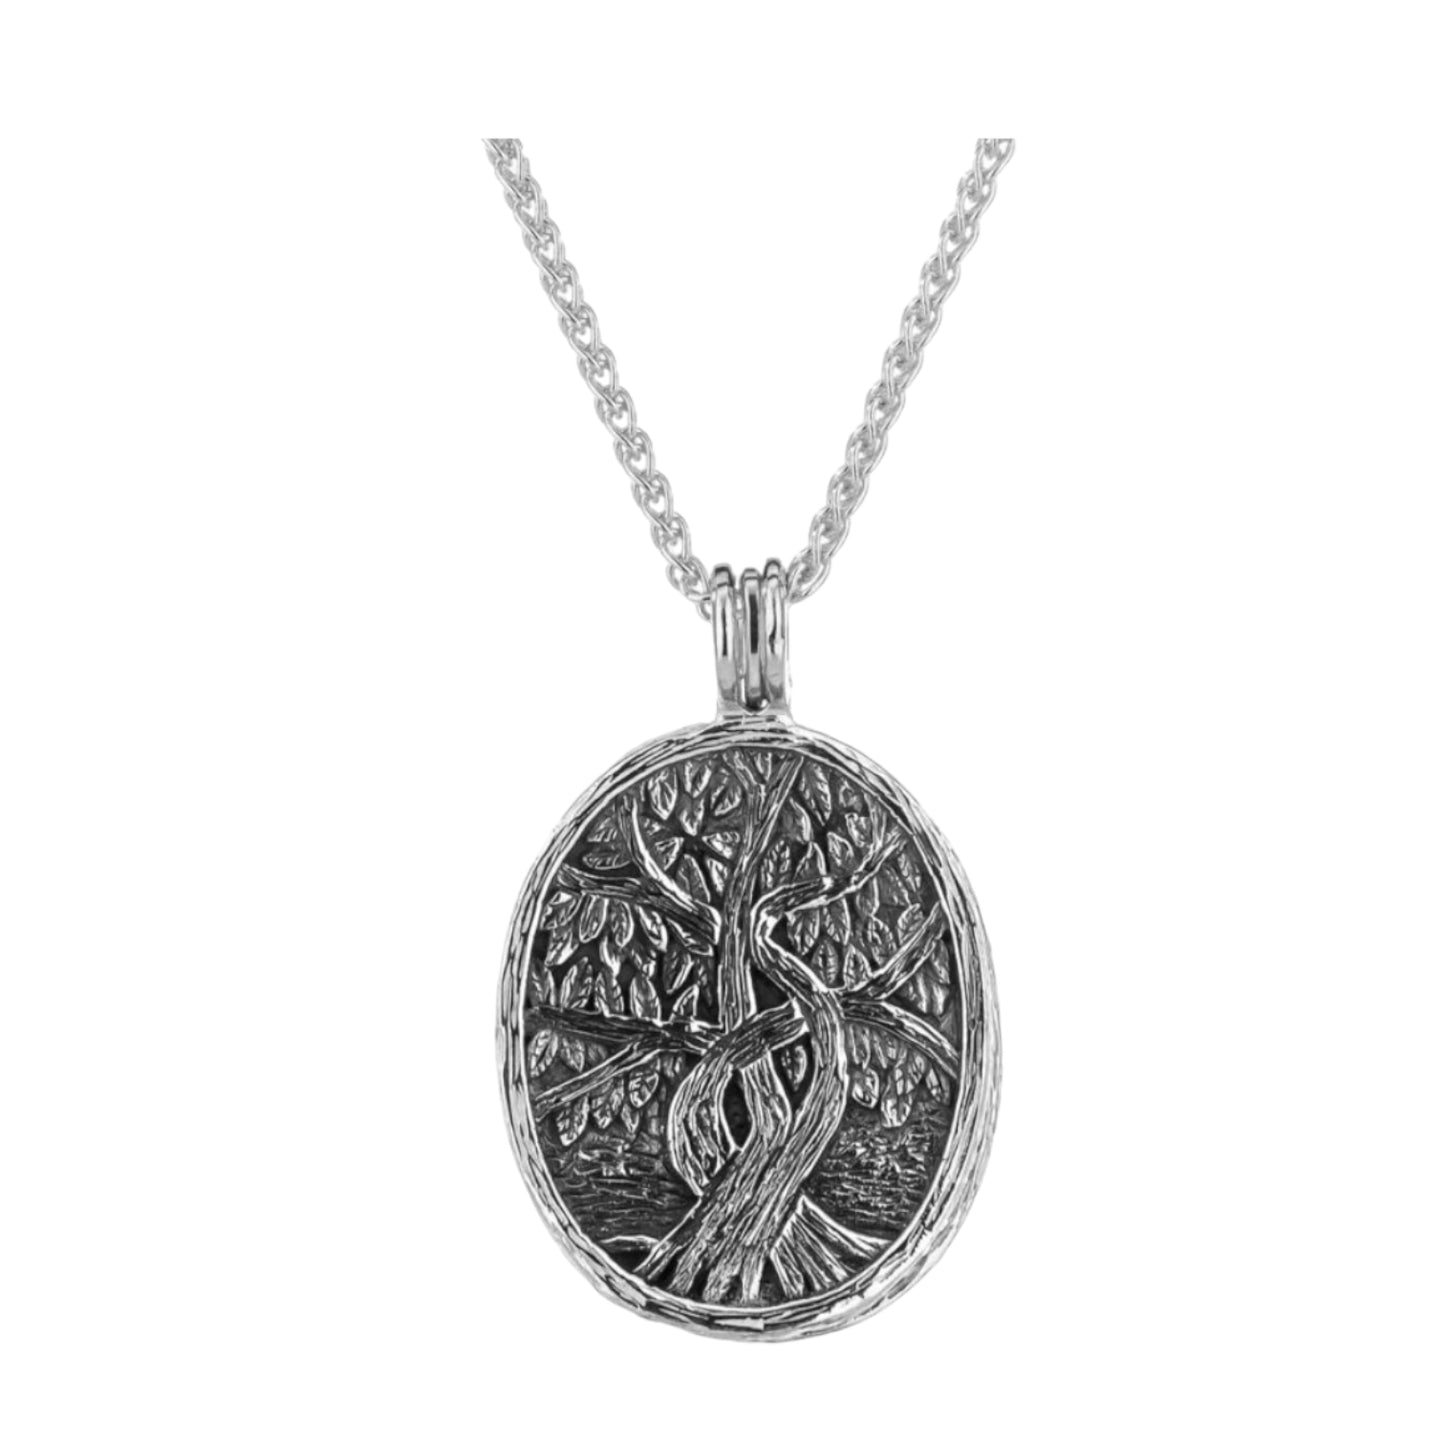 Keith Jack Silver with 22K Gold Gilding Tree of Life 4 Way Pendant